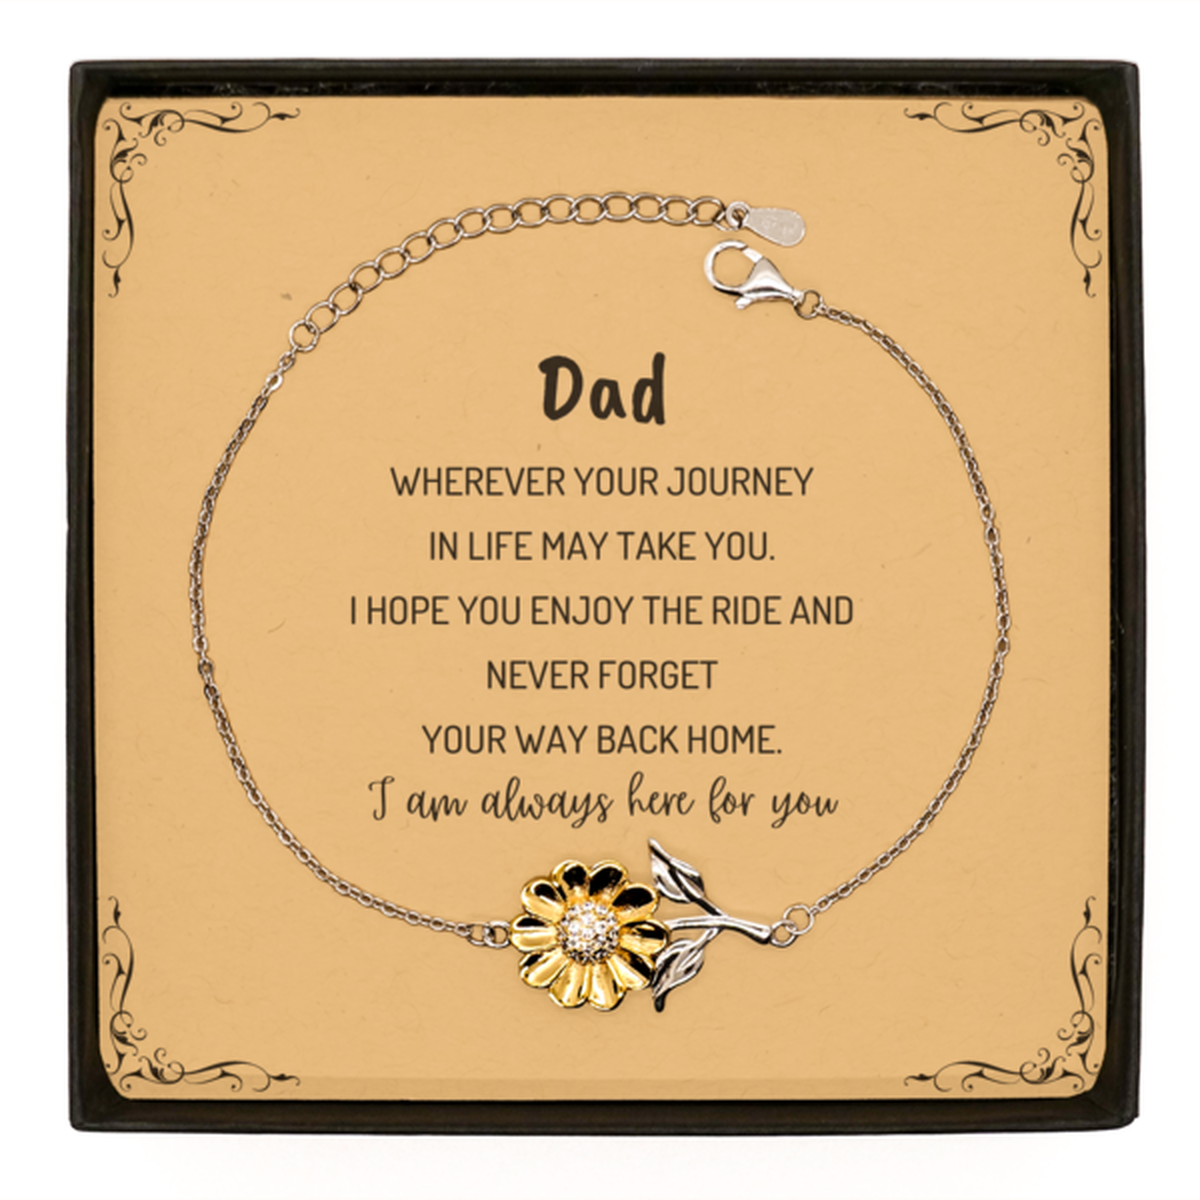 Dad wherever your journey in life may take you, I am always here for you Dad Sunflower Bracelet, Awesome Christmas Gifts For Dad Message Card, Dad Birthday Gifts for Men Women Family Loved One